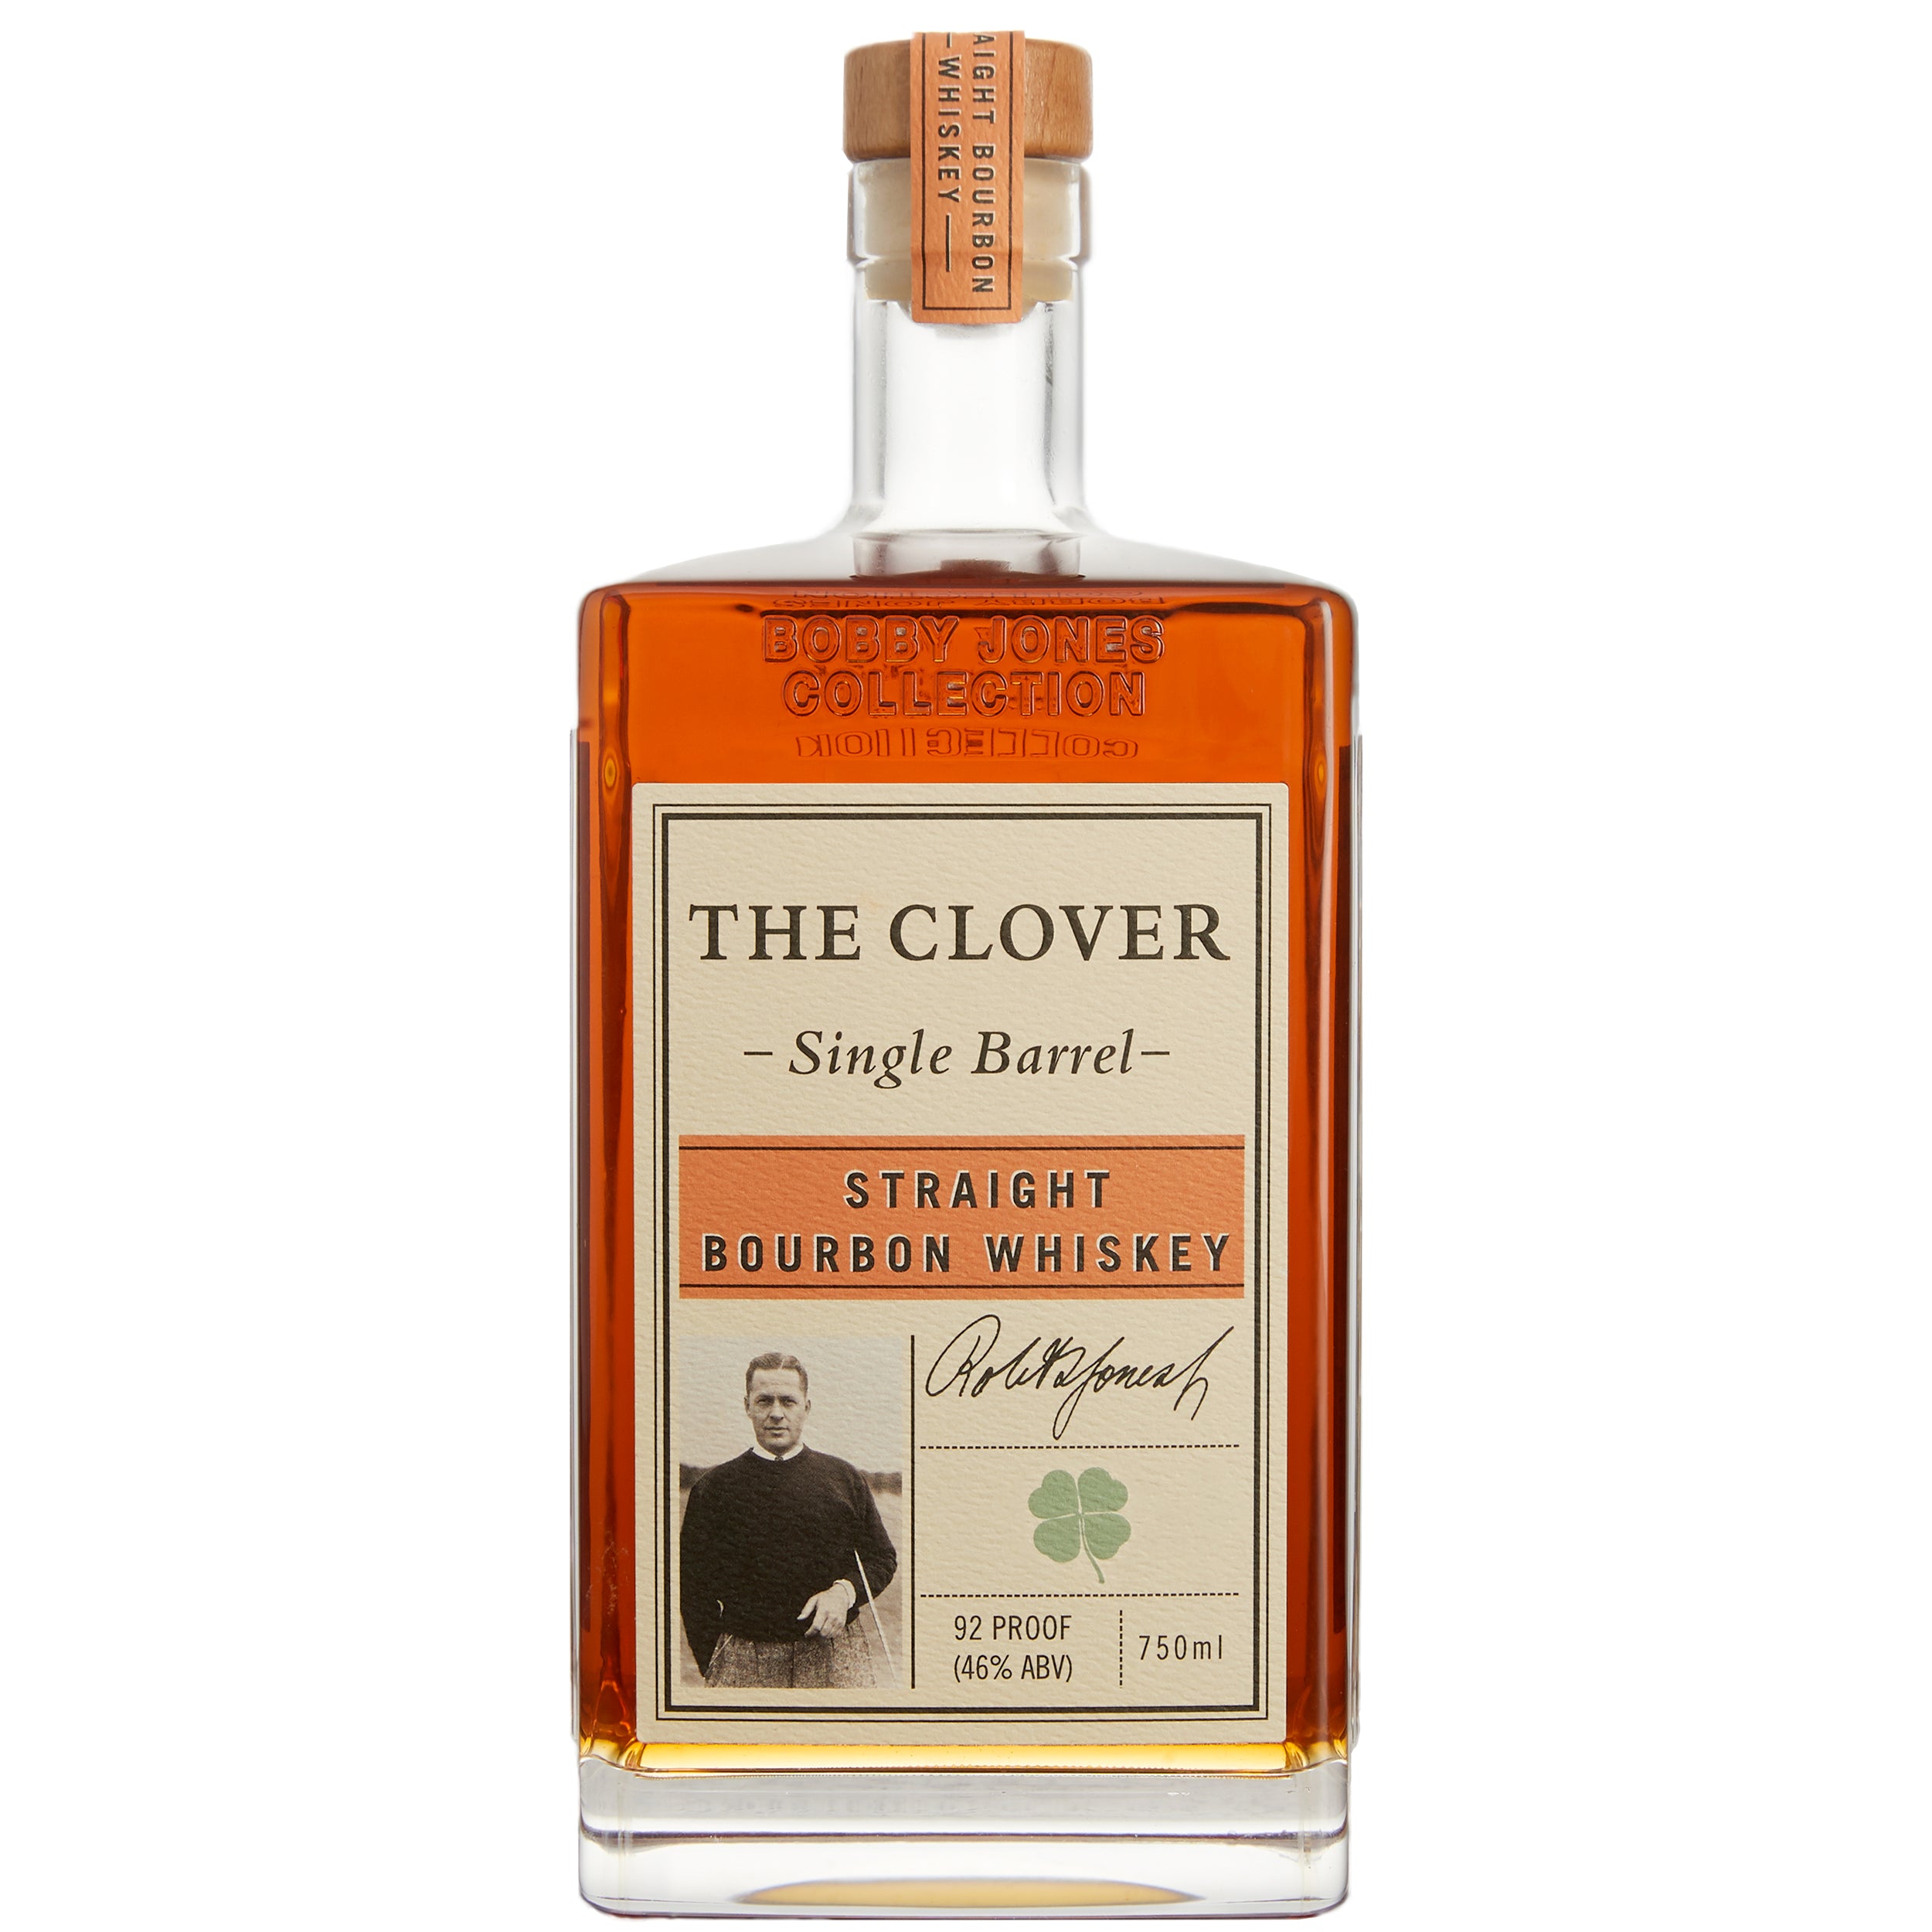 The Clover The Bobby Jones Collection Bourbon Whiskey